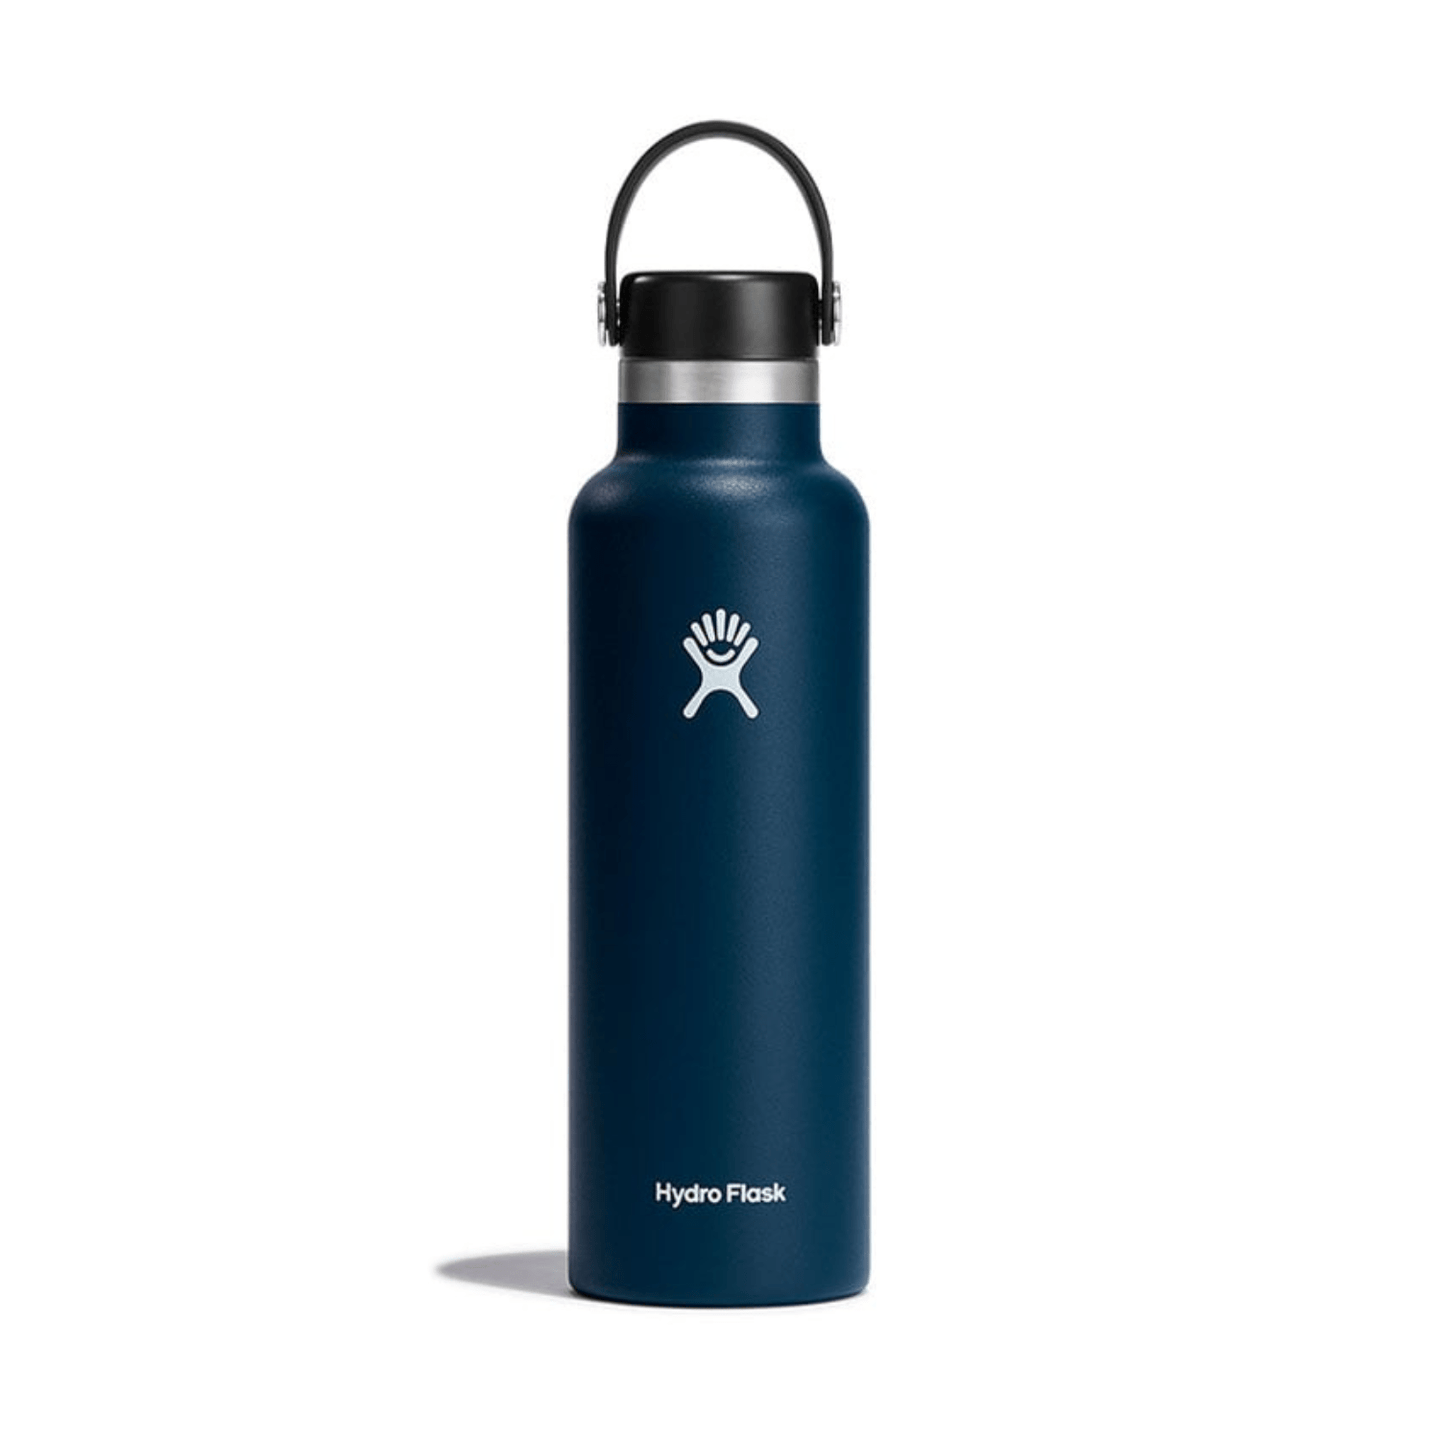 Hydro Flask Vacuum Bottle with Standard Mouth, 620 ML